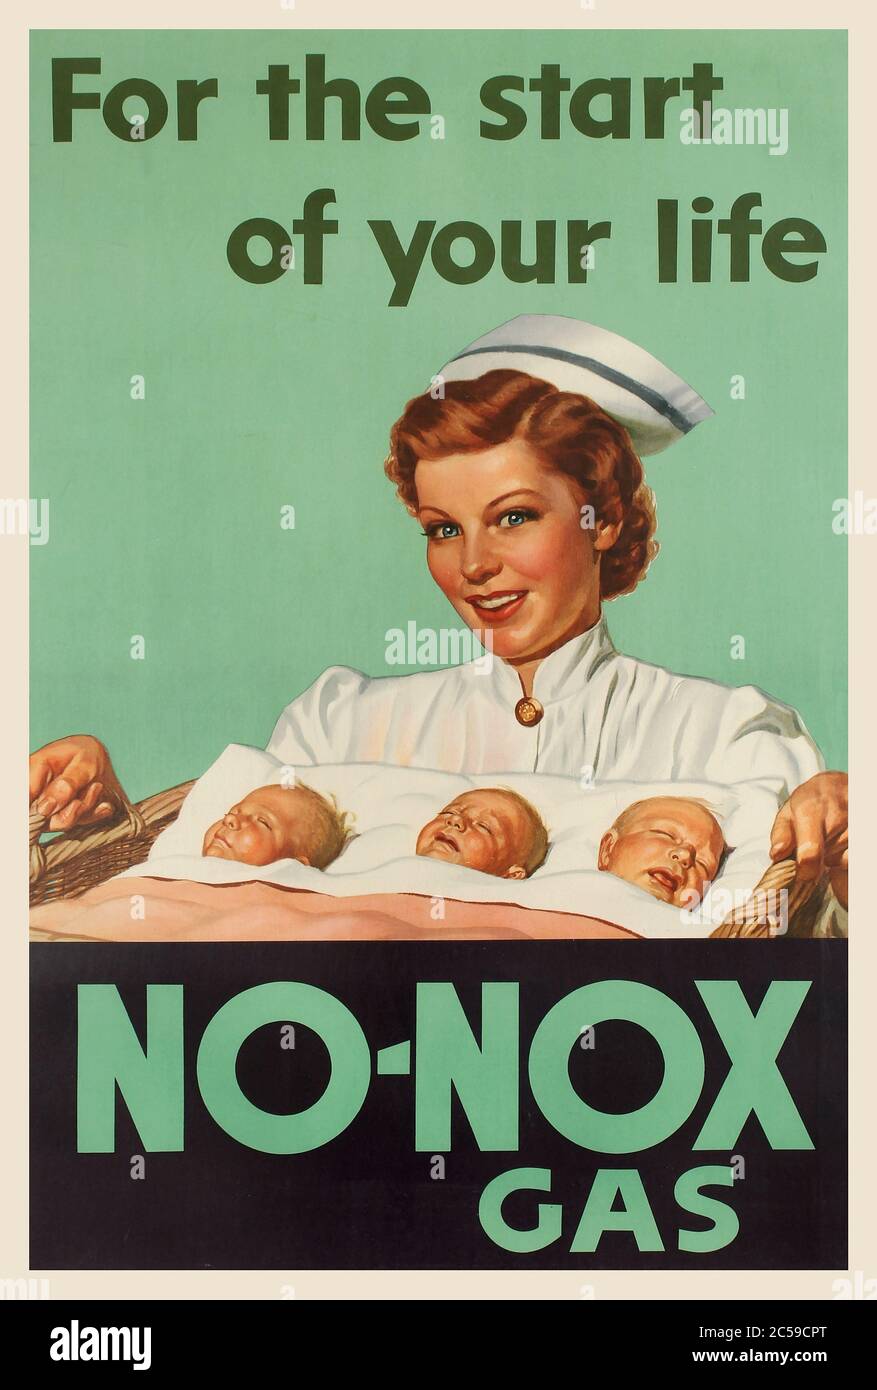 PETROL PETROLEUM GAS HEALTH BENEFITS USA Vintage 1940's advertising poster  'For the start of your life' - 'No-Nox Gas'. Poster published by Gulf Oil corporation to be displayed at all gas stations not retailing Gulflex Services, featuring a nurse carrying a basket with three sleeping babies. Litho. in USA. Stock Photo